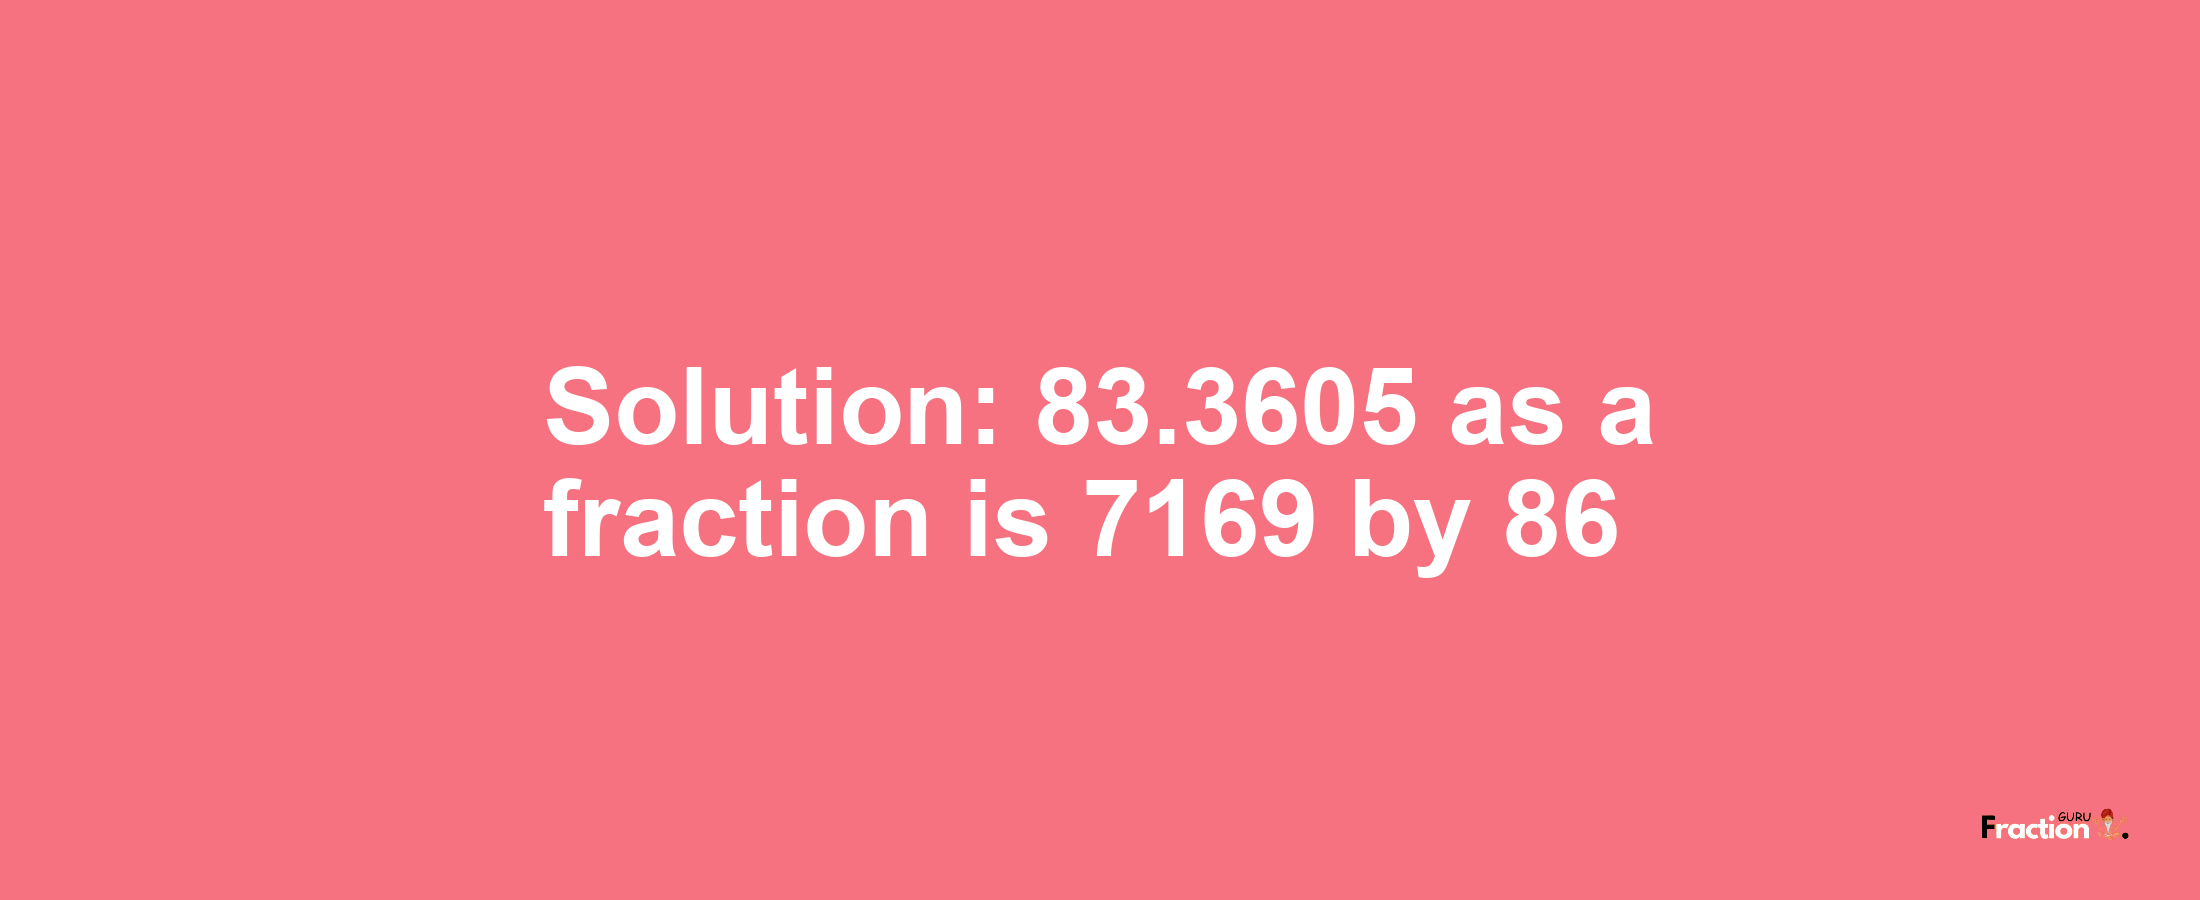 Solution:83.3605 as a fraction is 7169/86